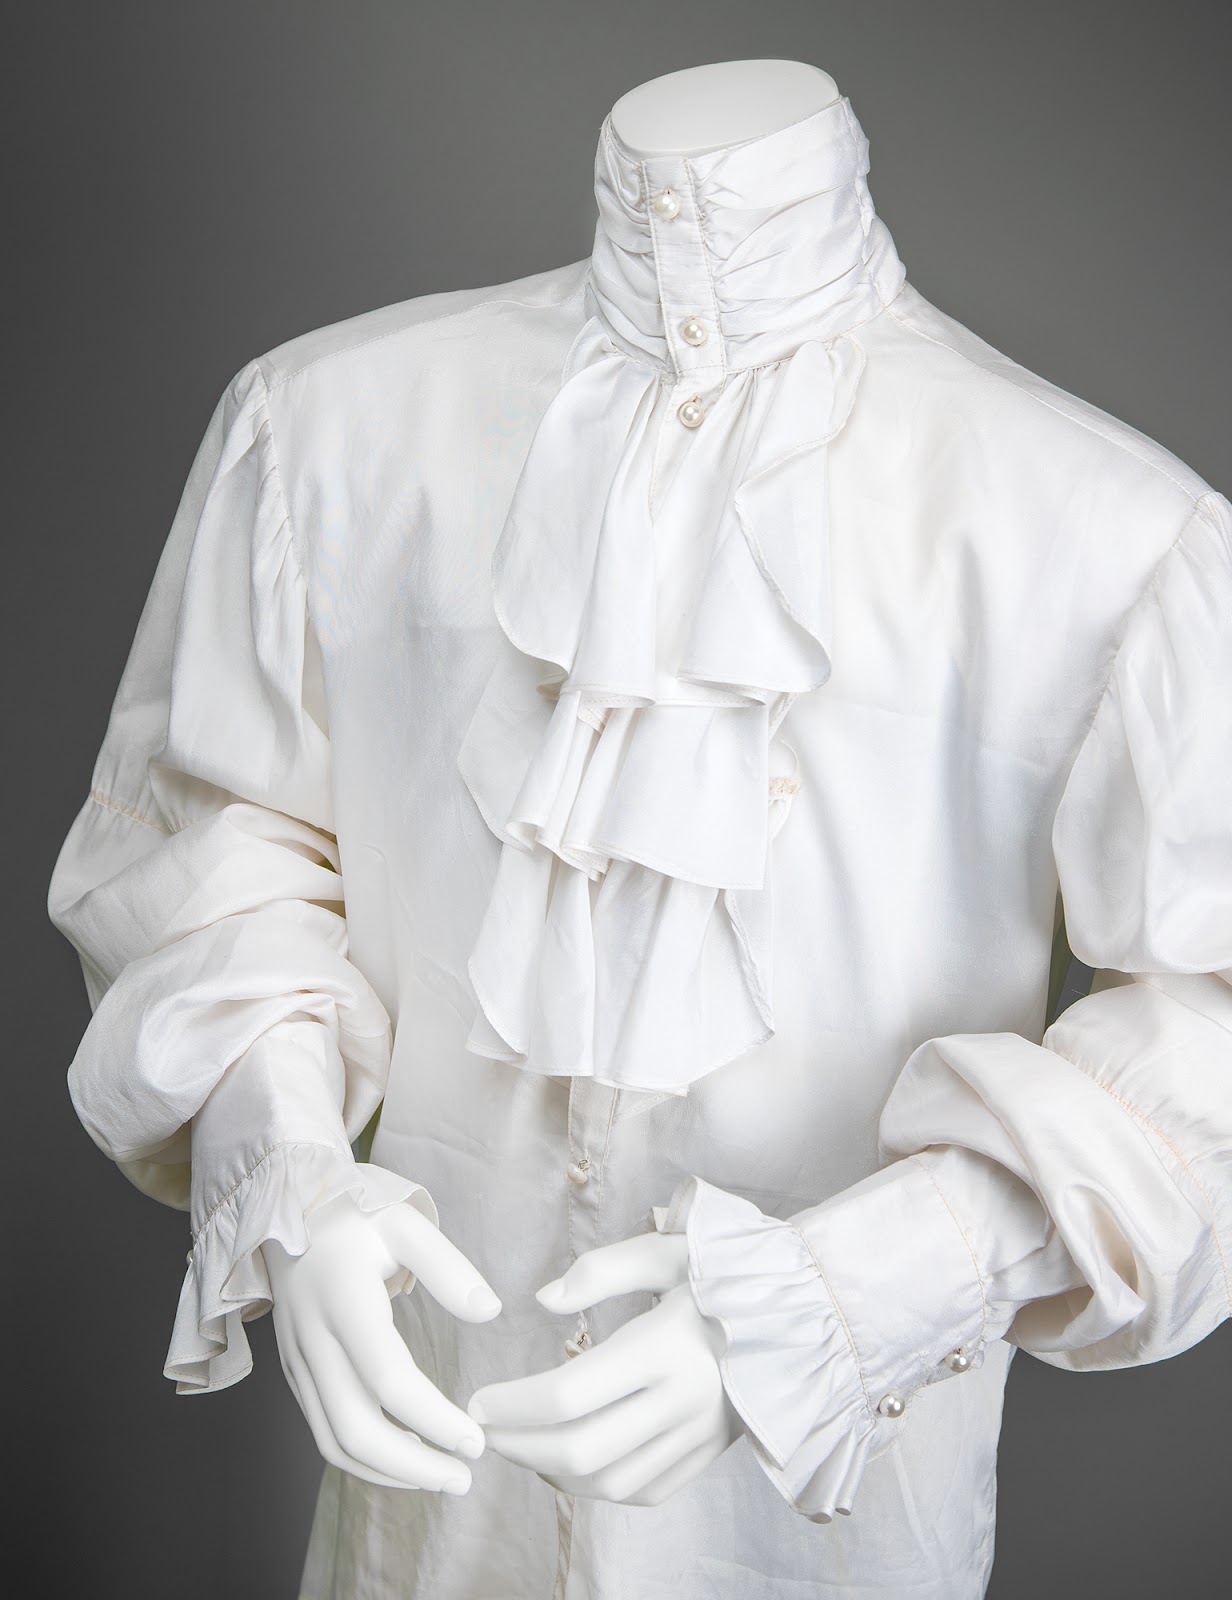 Prince’s stage-worn white ruffled shirt from his 1985 performance of Purple Rain at the American Music Awards.